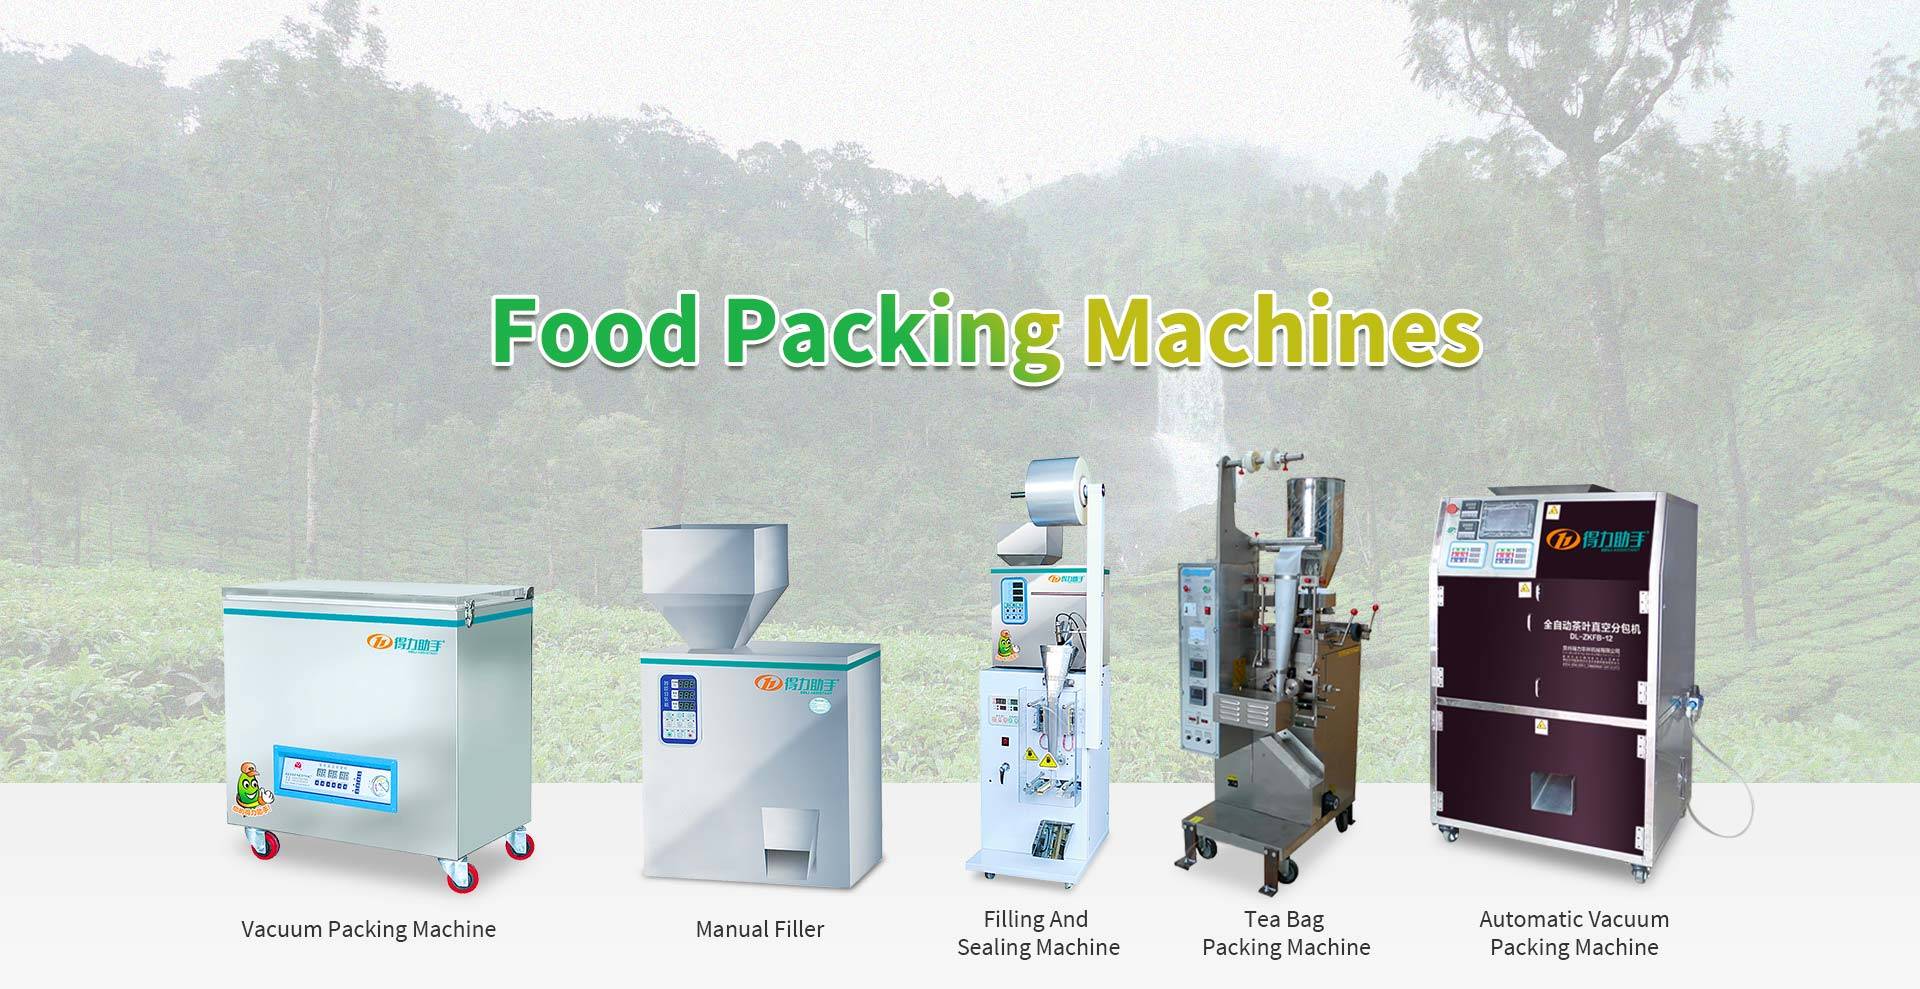 Machines d'emballage alimentaire